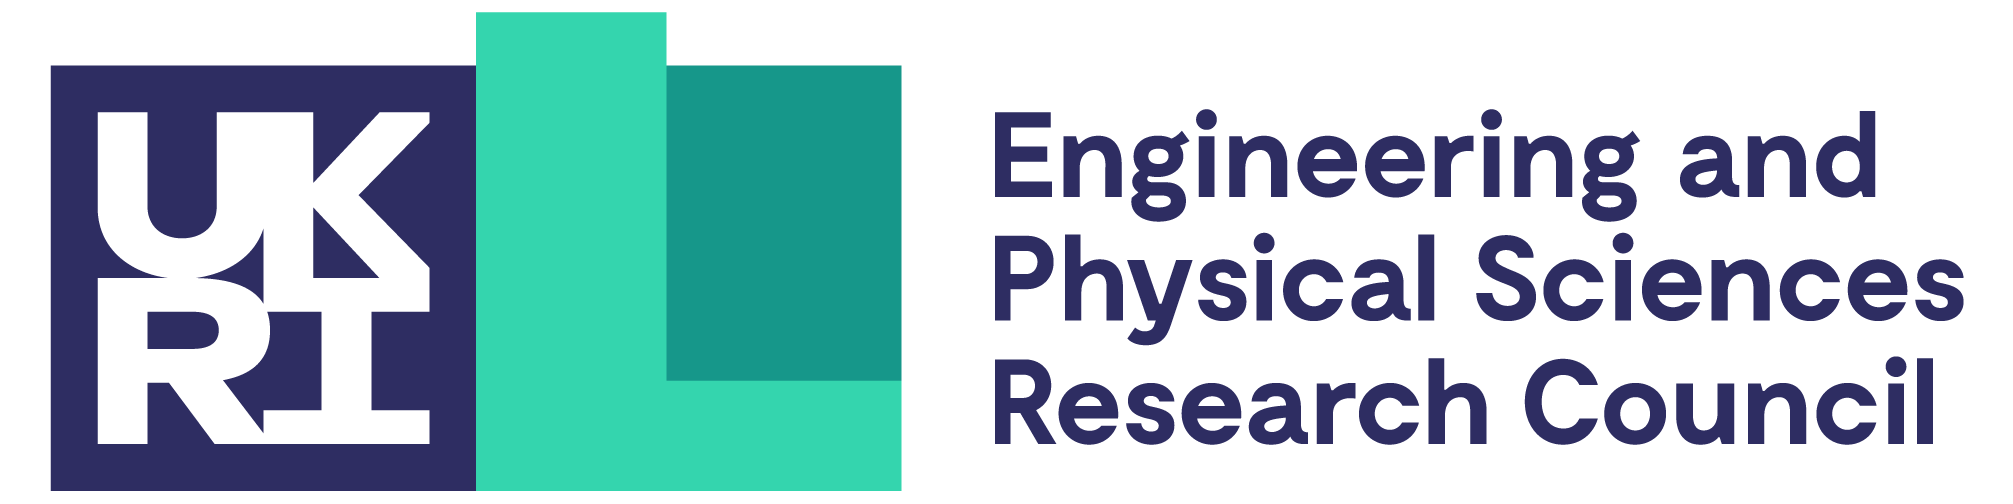 The Engineering and Physical Sciences Research Council